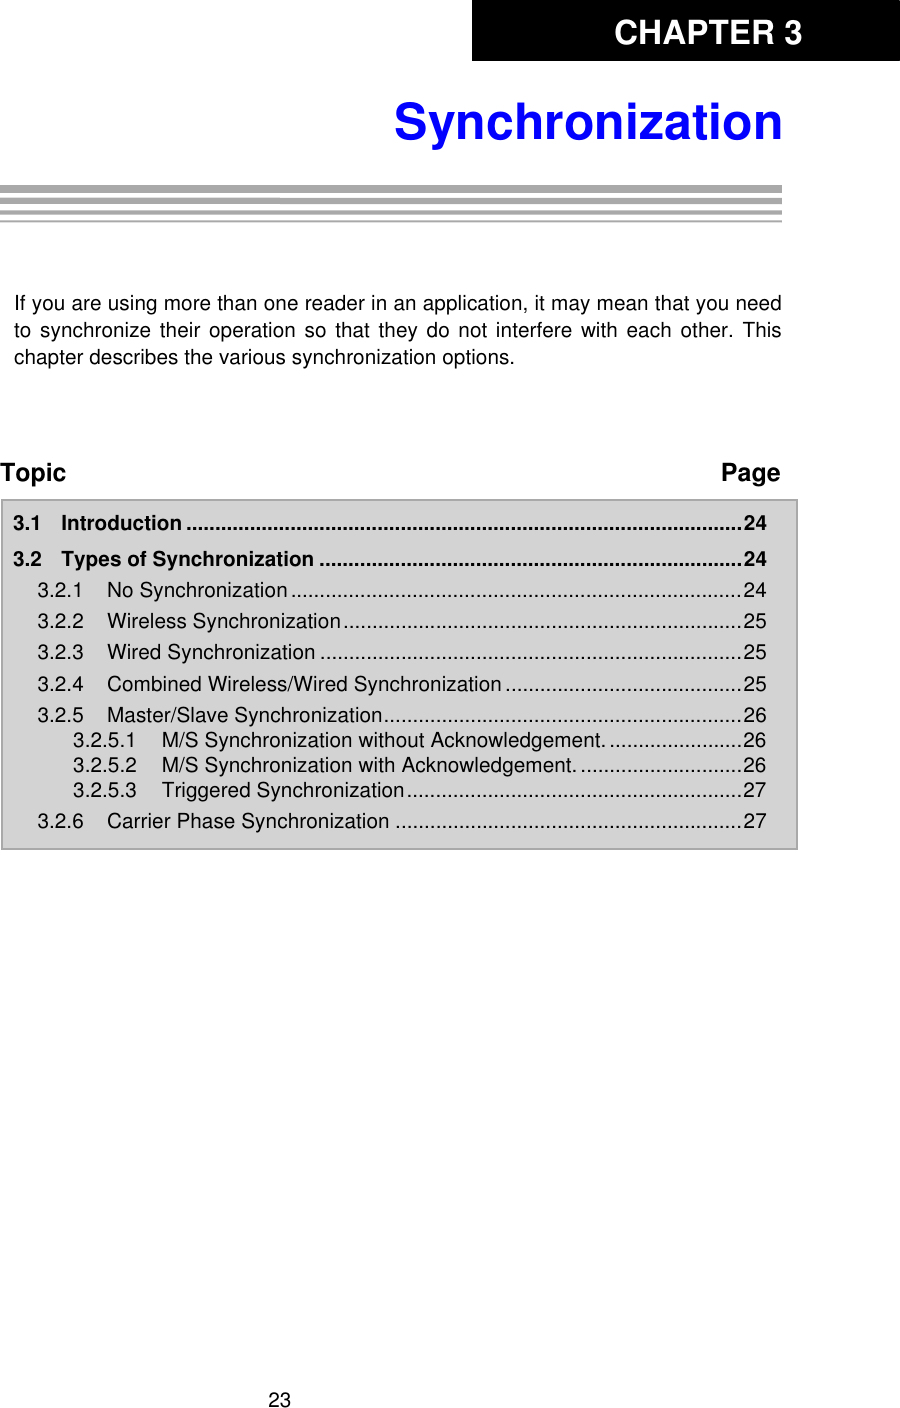 CHAPTER 323SynchronizationChapter 3:SynchronizationIf you are using more than one reader in an application, it may mean that you needto synchronize their operation so that they do not interfere with each other. Thischapter describes the various synchronization options. Topic Page3.1 Introduction ................................................................................................243.2 Types of Synchronization .........................................................................243.2.1 No Synchronization ..............................................................................243.2.2 Wireless Synchronization.....................................................................253.2.3 Wired Synchronization .........................................................................253.2.4 Combined Wireless/Wired Synchronization .........................................253.2.5 Master/Slave Synchronization..............................................................263.2.5.1 M/S Synchronization without Acknowledgement........................263.2.5.2 M/S Synchronization with Acknowledgement. ............................263.2.5.3 Triggered Synchronization..........................................................273.2.6 Carrier Phase Synchronization ............................................................27